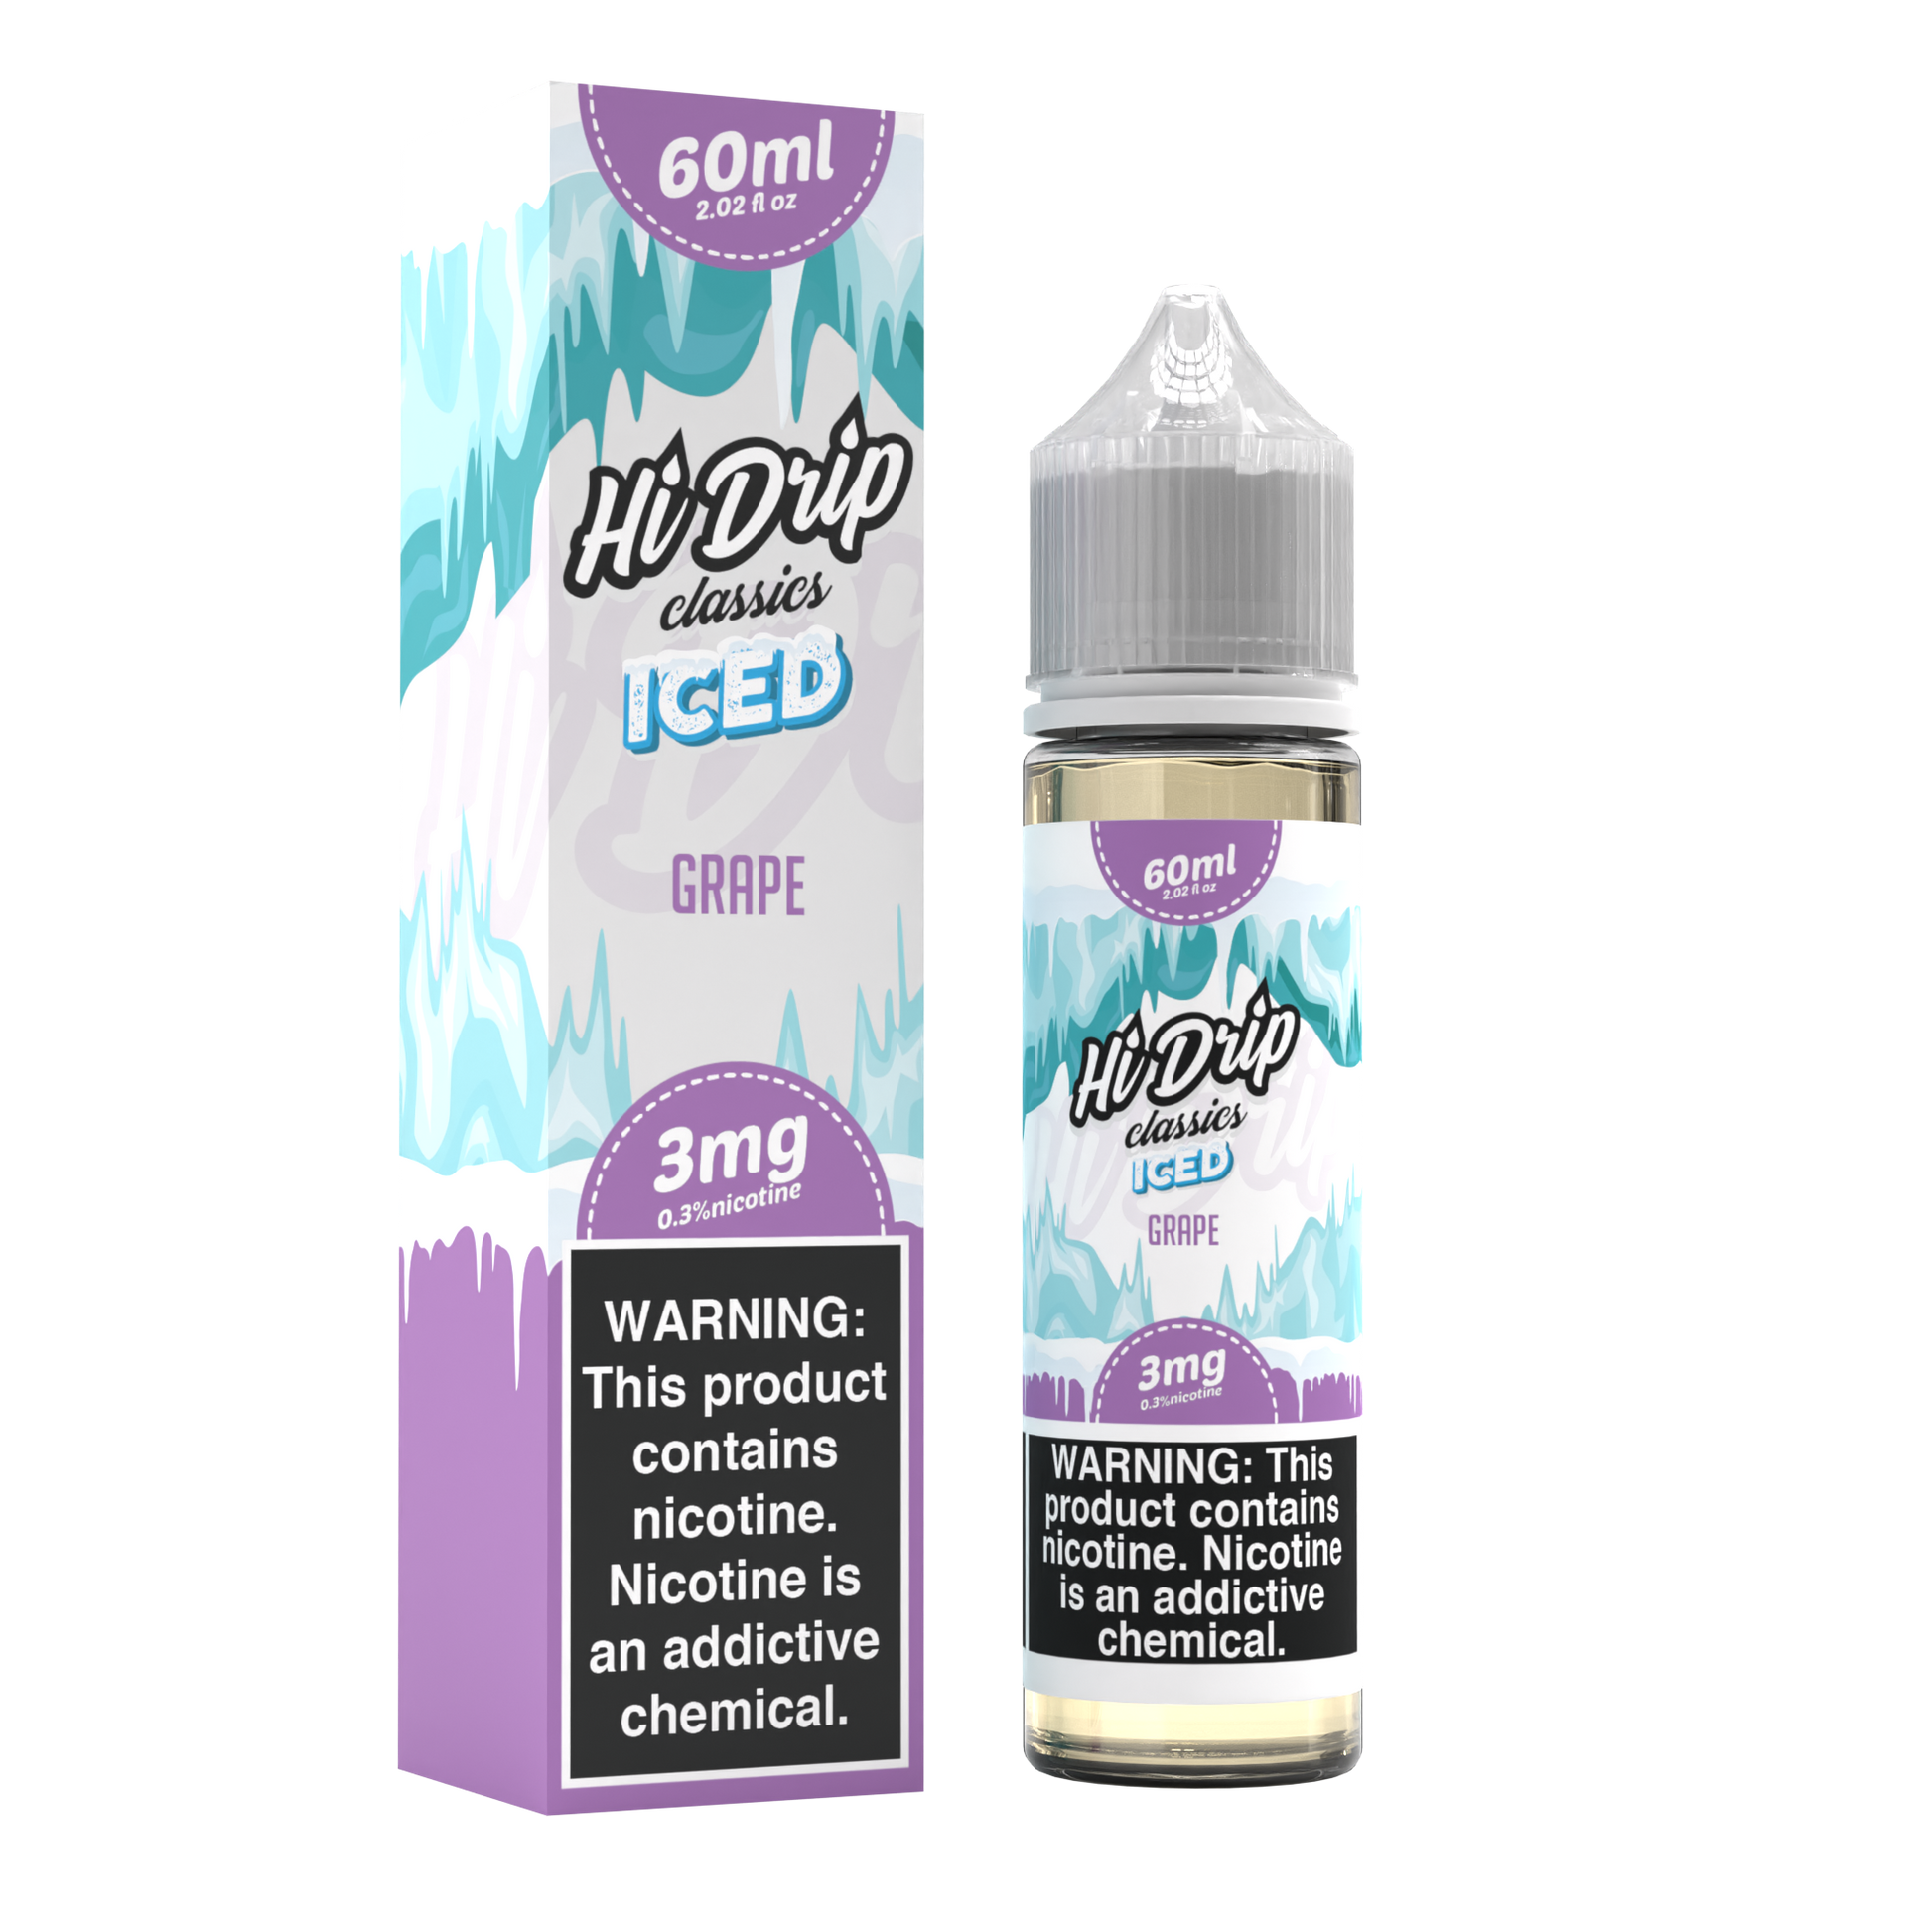 Grape Iced by Hi-Drip Classics Series 60mL with Packaging